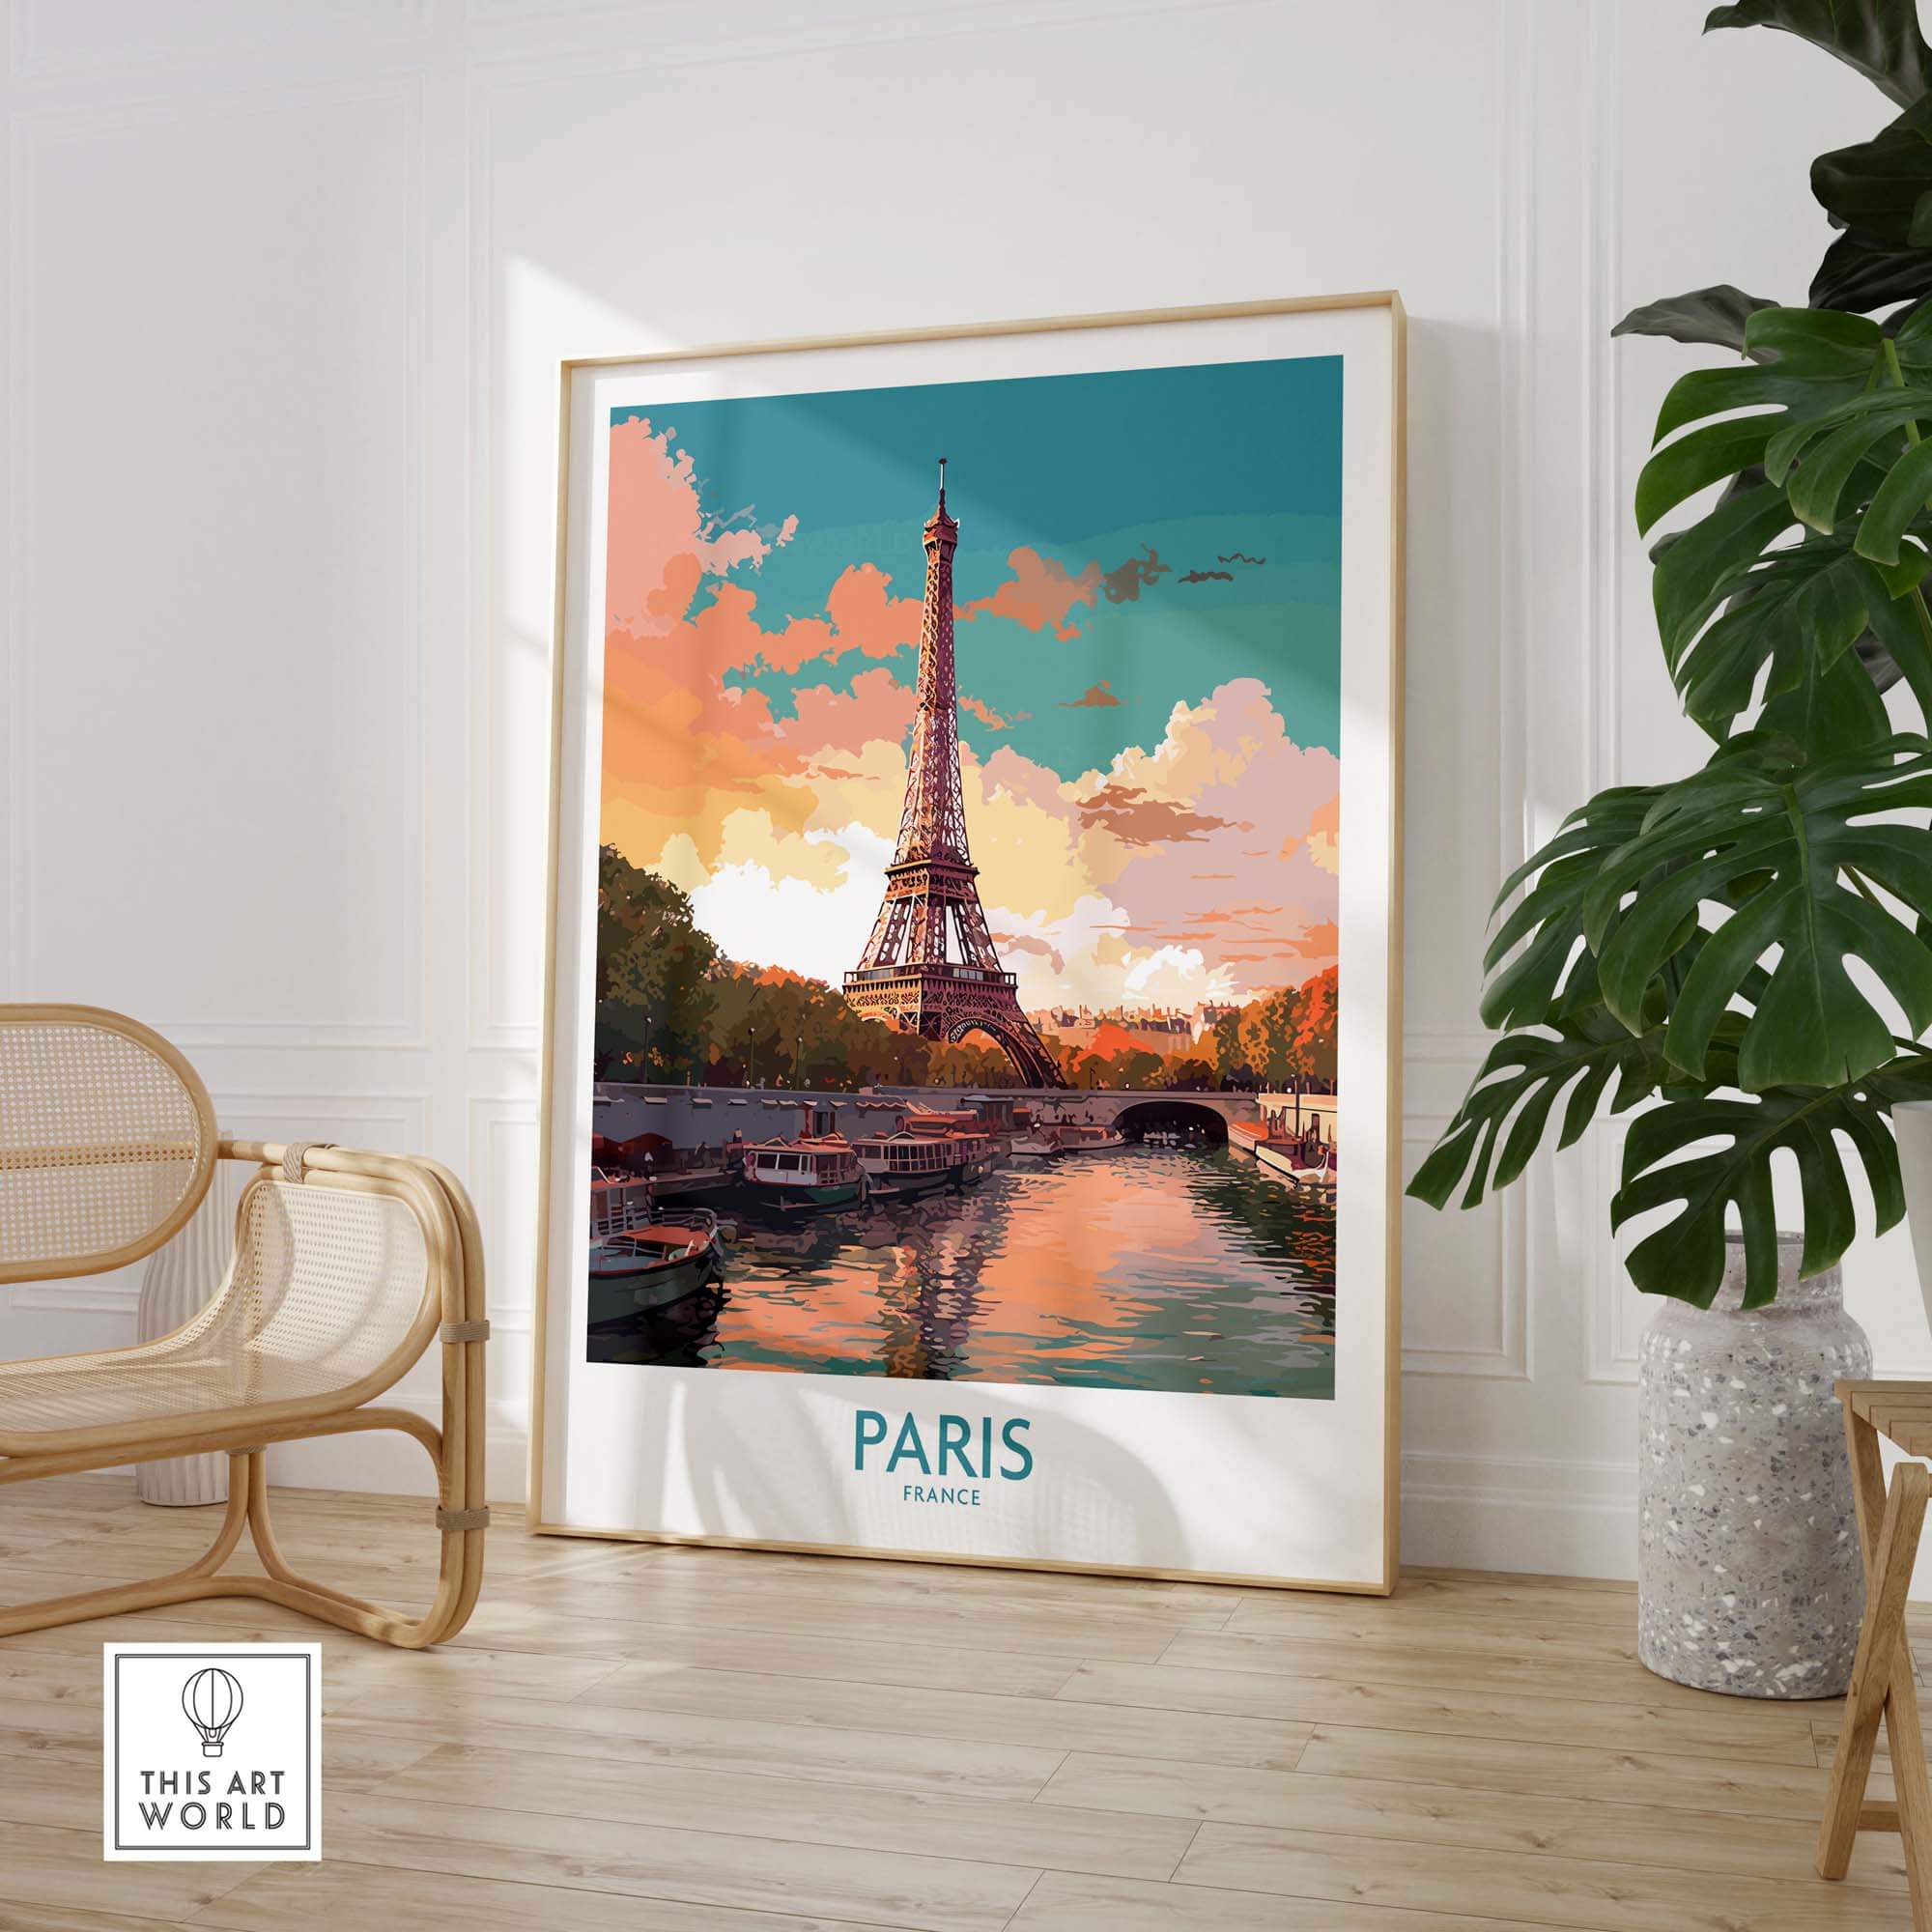 Framed travel poster of Paris featuring the Eiffel Tower at sunset. The frame is resting on the floor next to a cane chair in a boho chic room. 